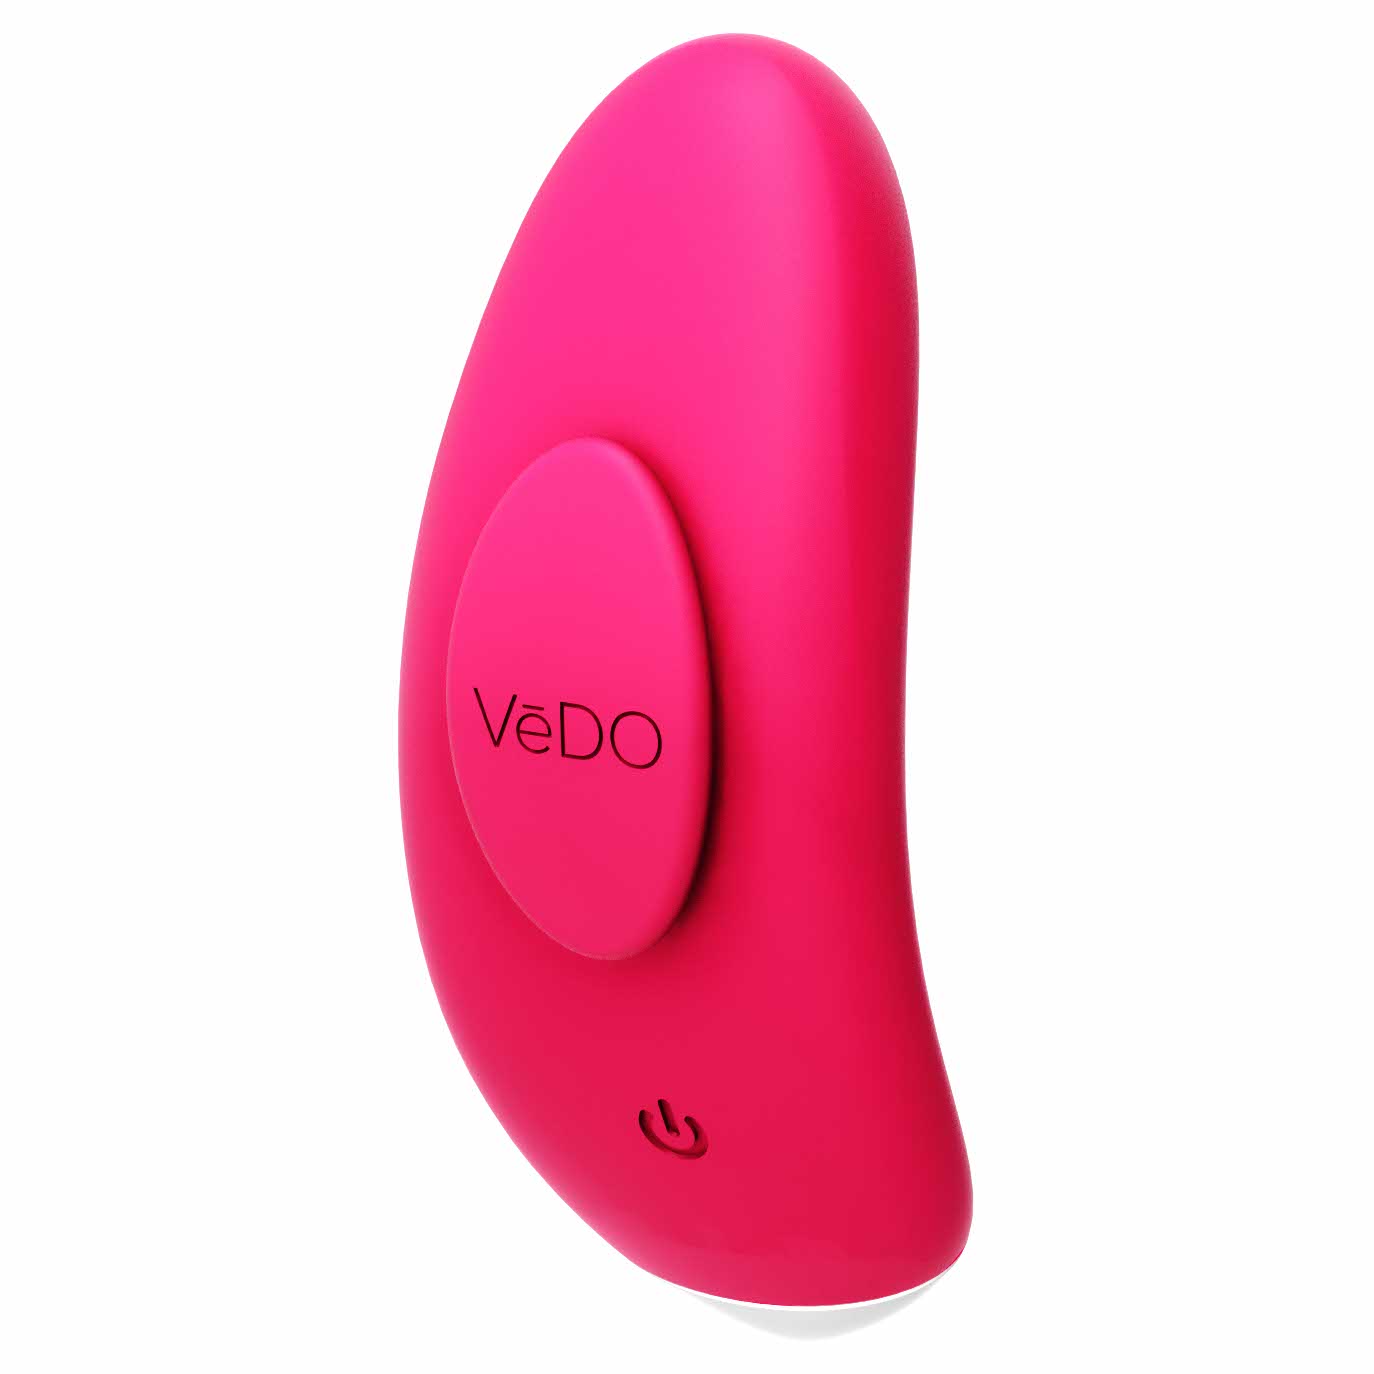 angled view of the vedo niki rechargeable panty vibrator vibe savvi-p1609 pink